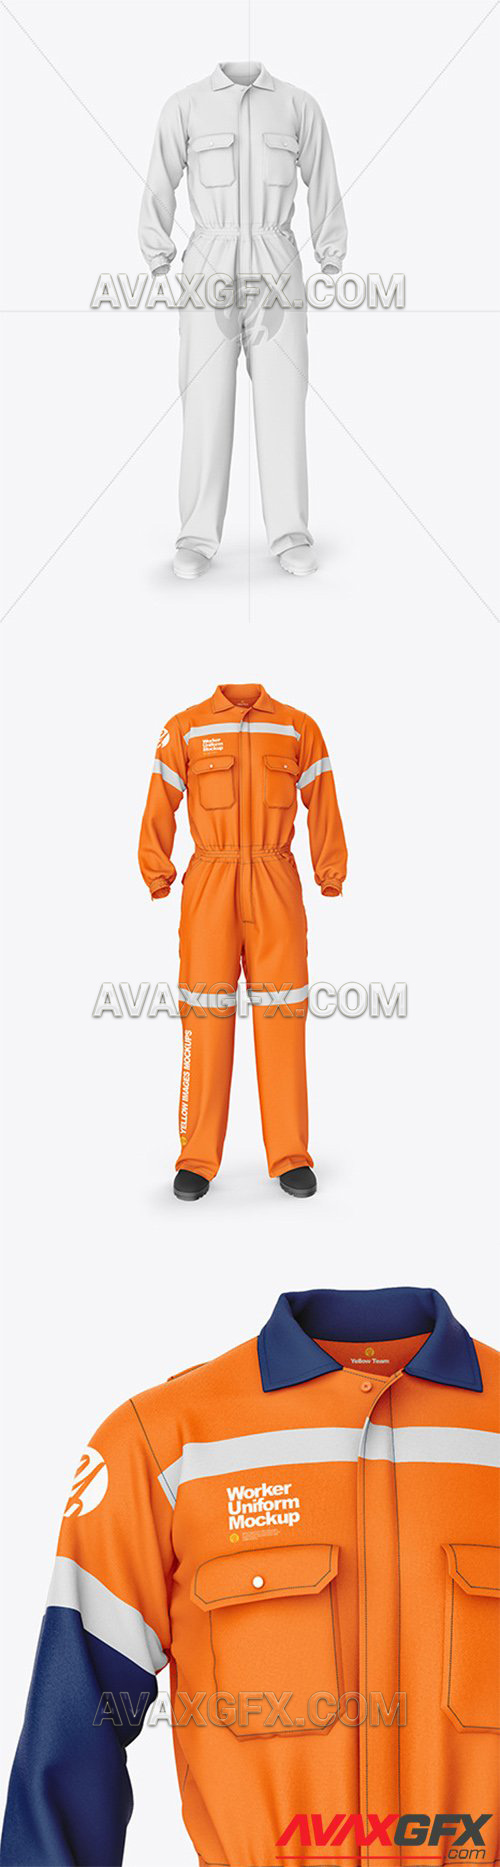 Worker Uniform Mockup - Front View 57159 » AVAXGFX - All Downloads that You Need in One Place ...